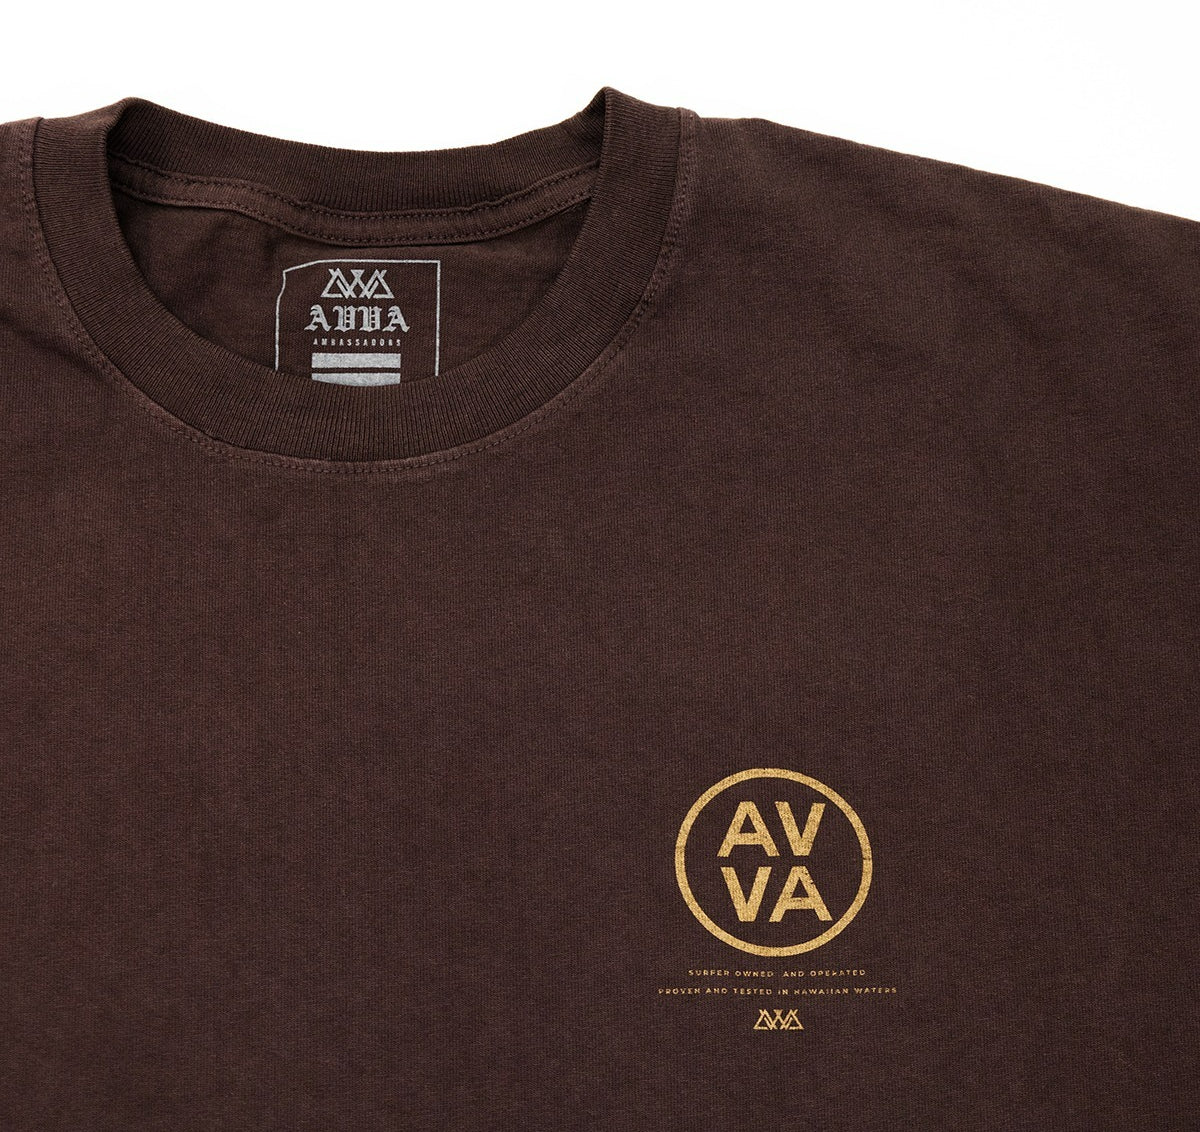 FRONT CLOSE UP VIEW OF BROWN HEAVYWEIGHT CREED TEE. HIGHLIGHTS THE SMALL AVVA LOGO IN TOP RIGHT.